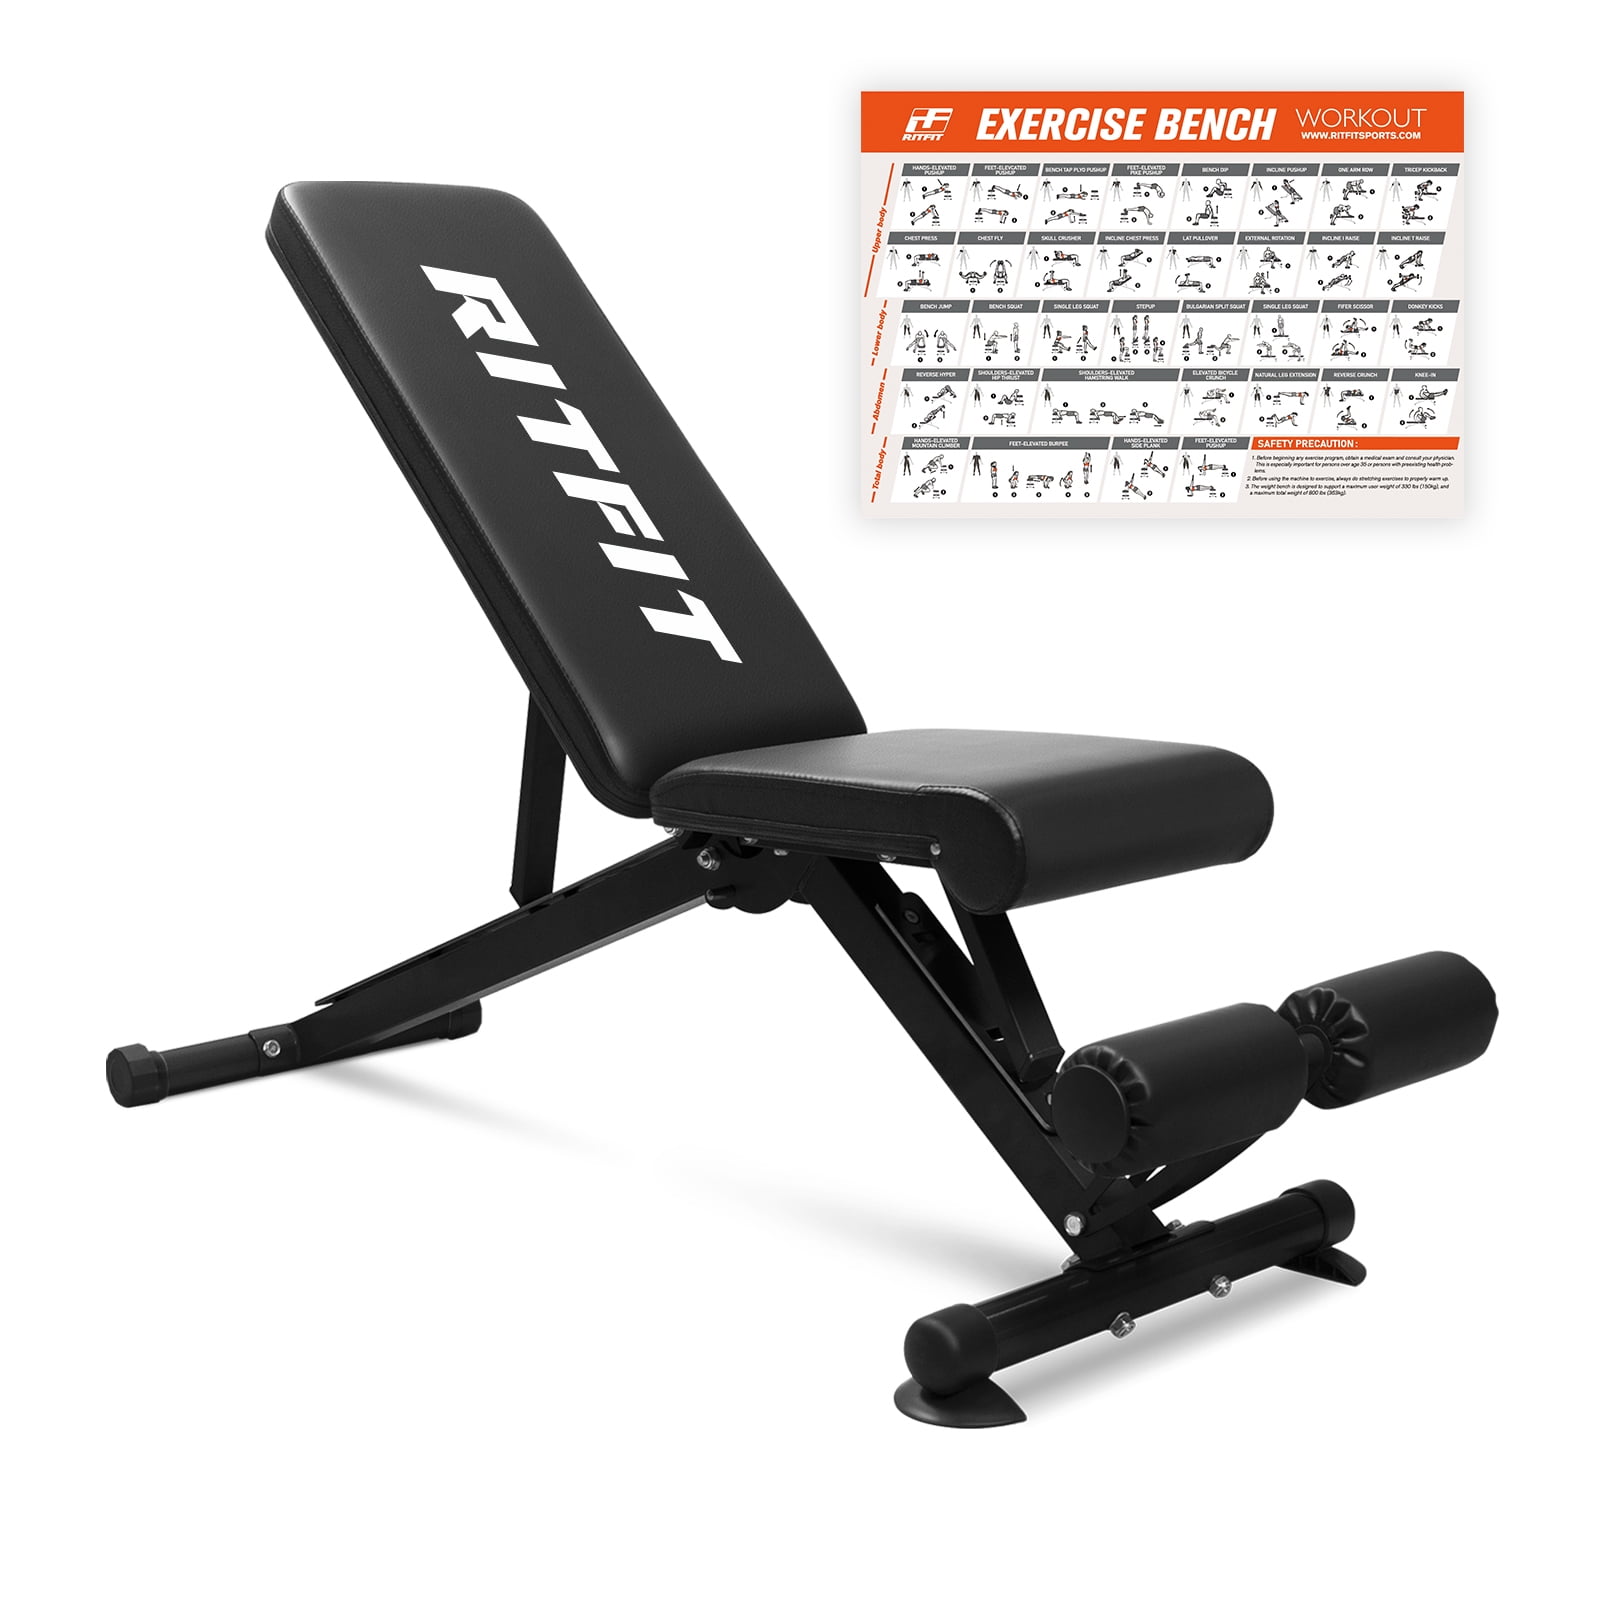 Pooboo Sturdy Foldable Weight Bench Adjustable Incline No ASSEMBLY NEEDED  Strength Training Bench for Full Body Workout Home Gym 800lbs